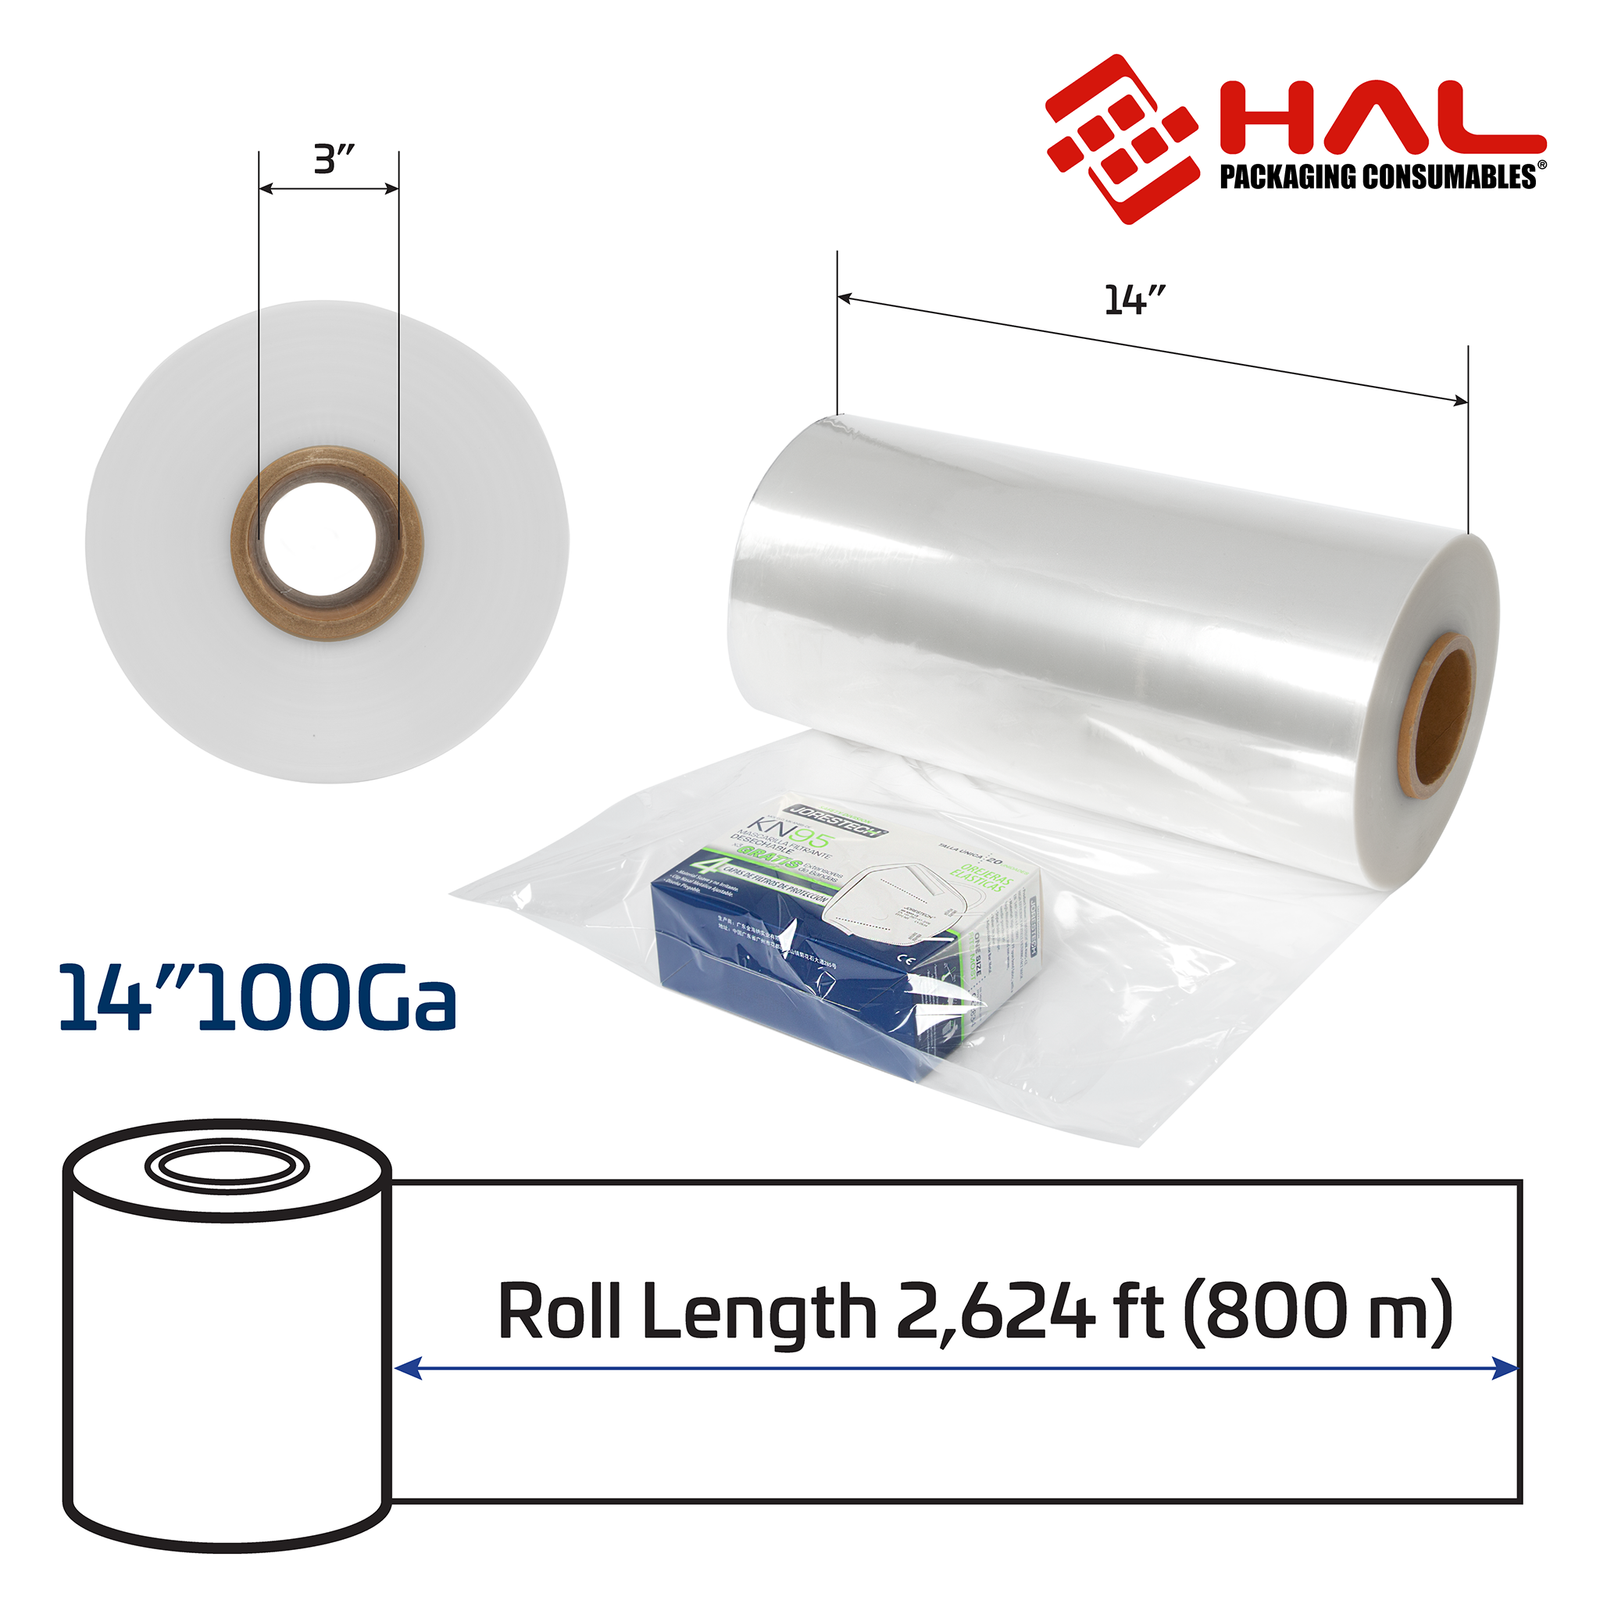 Measurements of the 100 gauge shrink wrapping film tube. 3 inch diameter of the inner core, and 14 inch width with a 2,624 ft. length (800 meters).